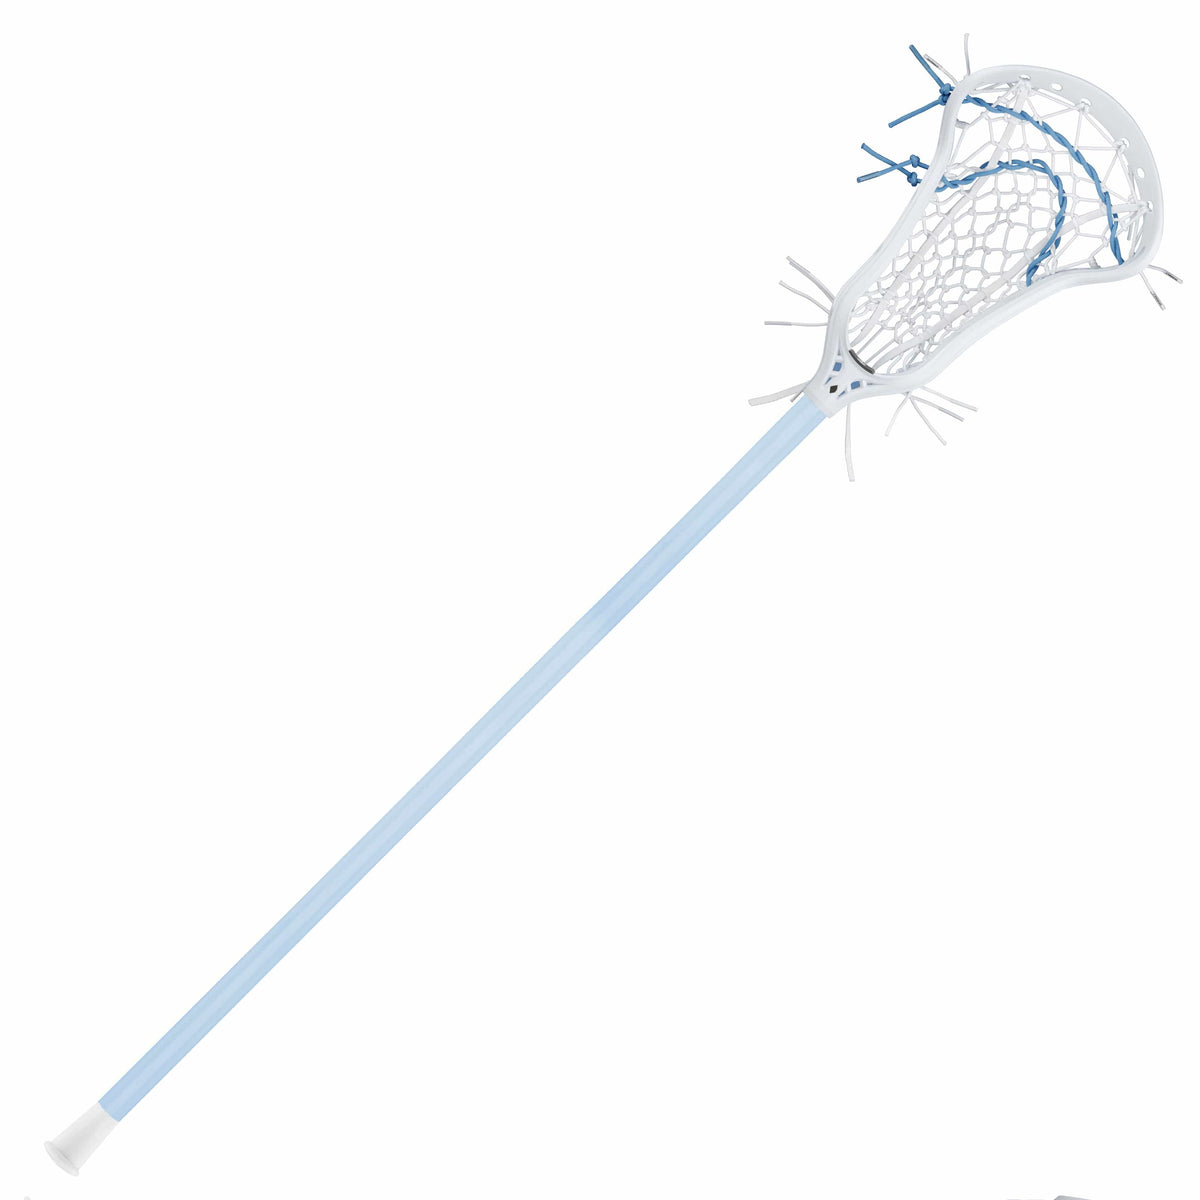 StringKing Womens Complete Sticks Carolina/White StringKing Womens Complete 2 Pro Offense Lacrosse Stick with Tech Trad and Metal 3 Pro Shaft from Lacrosse Fanatic